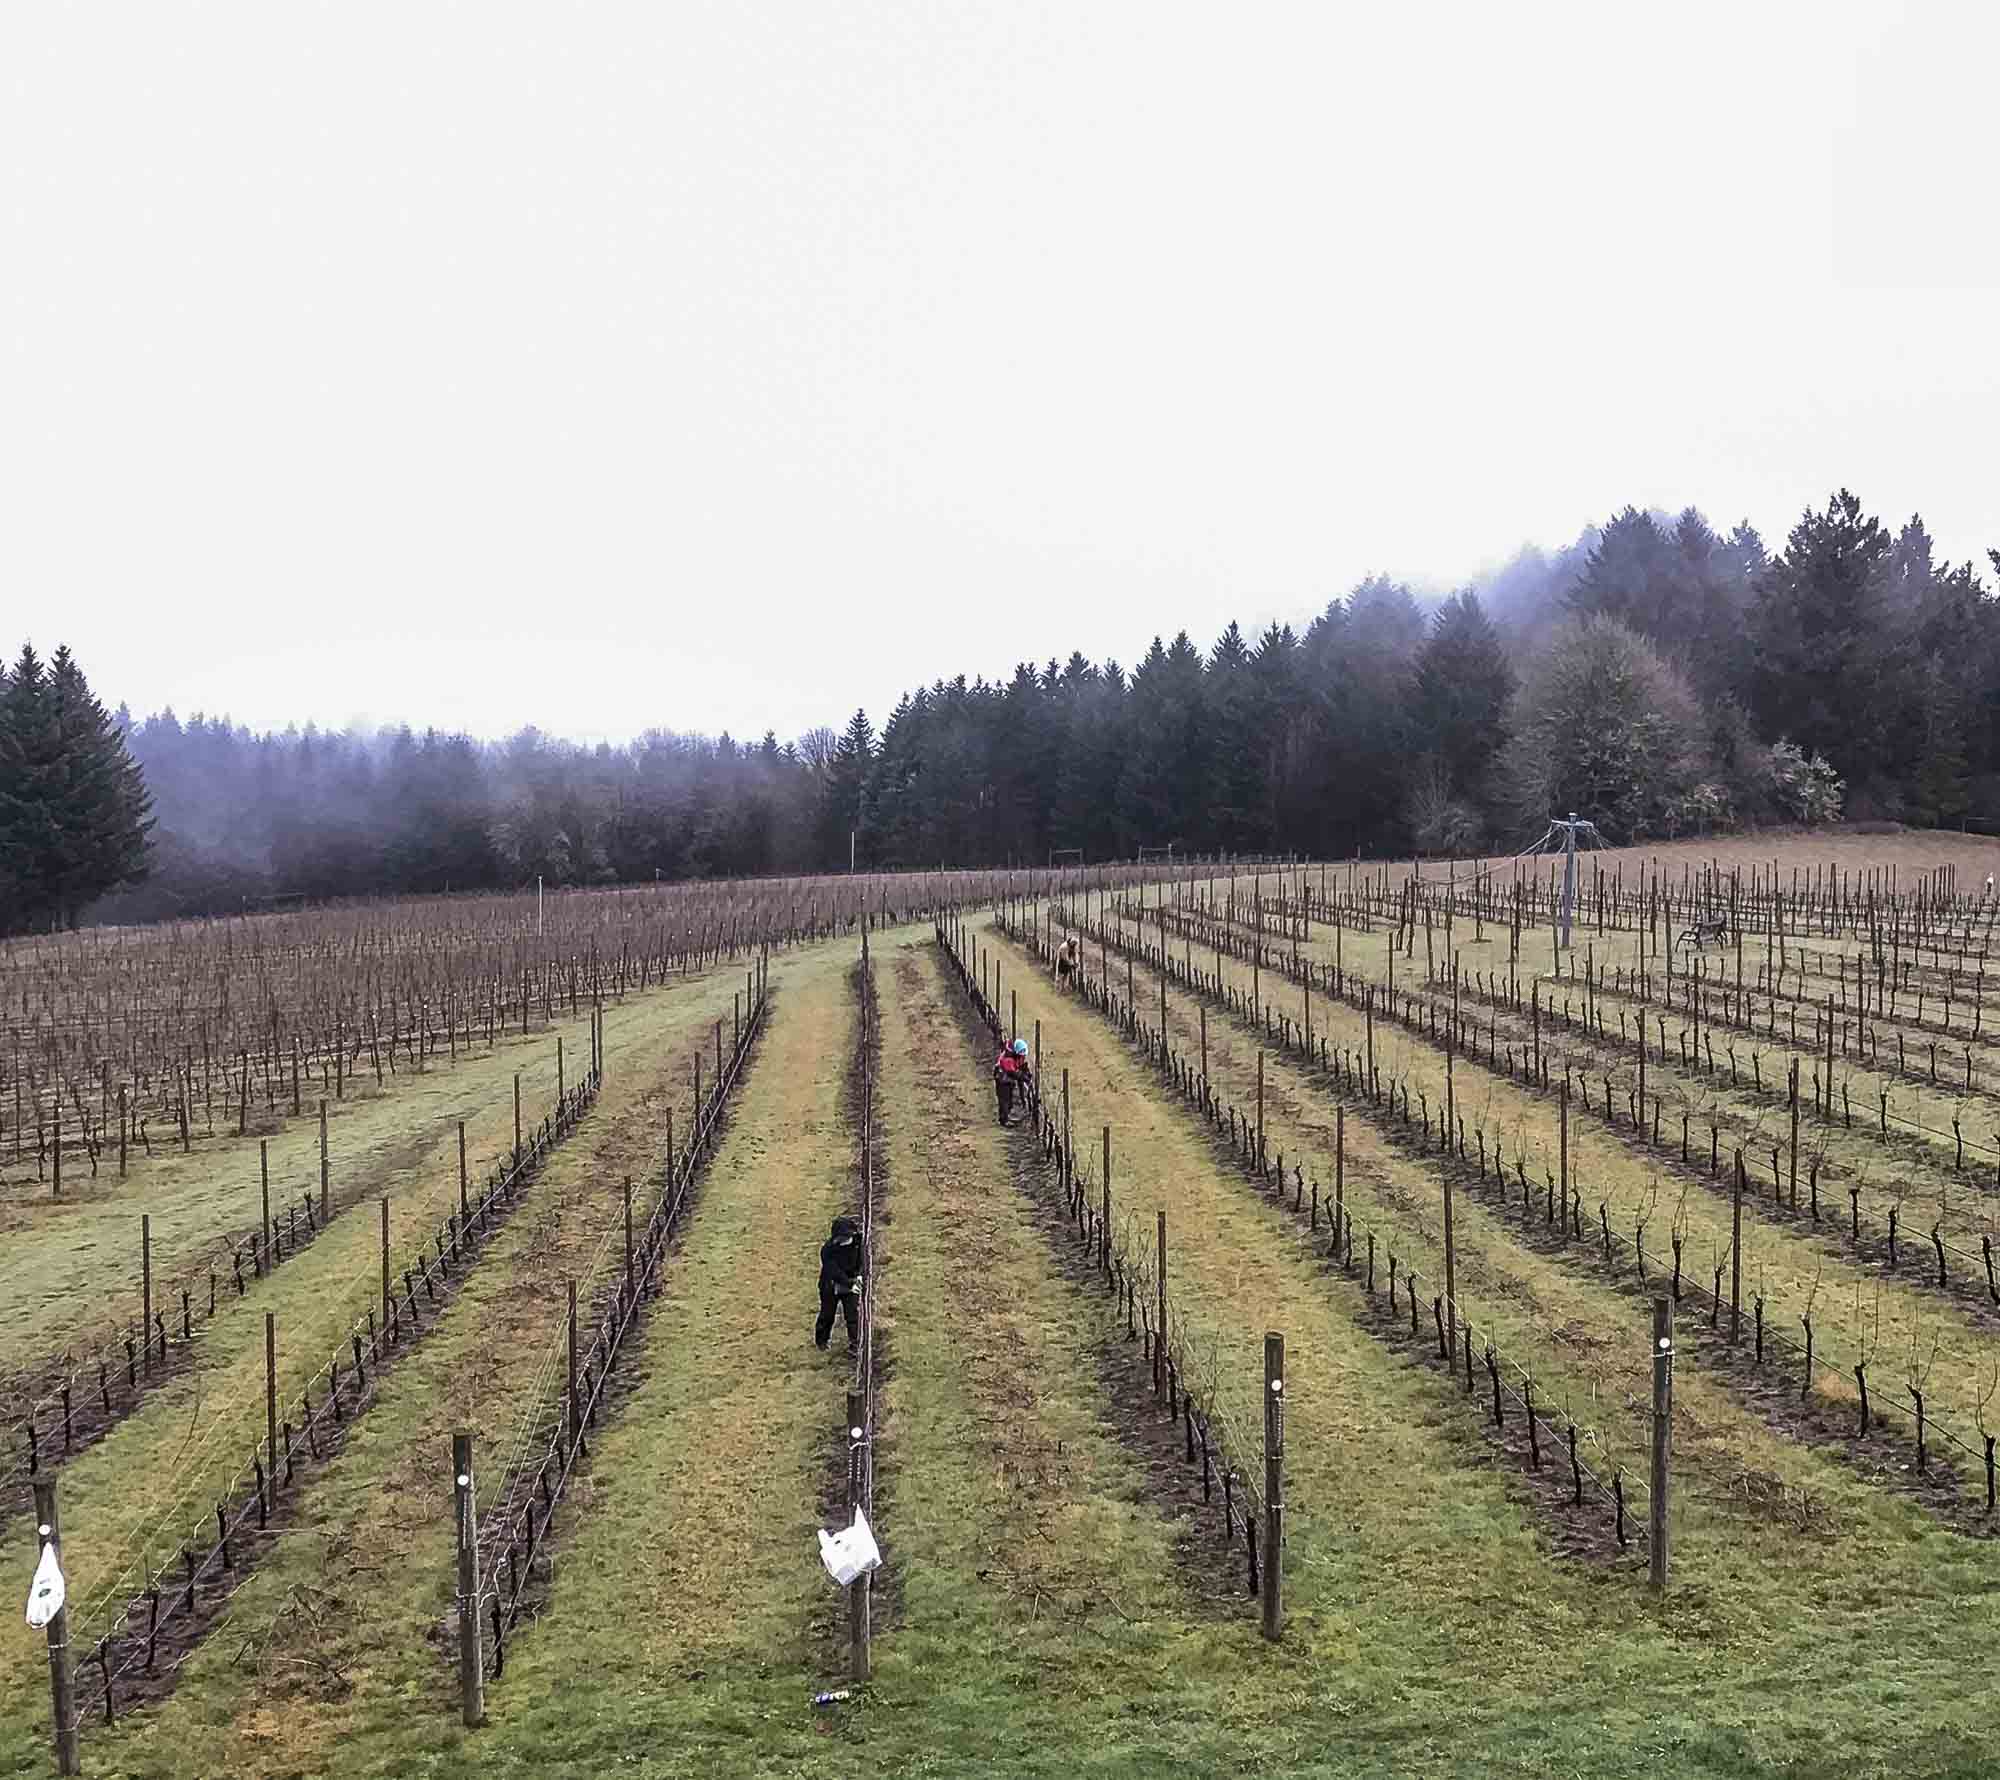 There was the usual midwinter break in February when workers all over the valley pruned vines. 